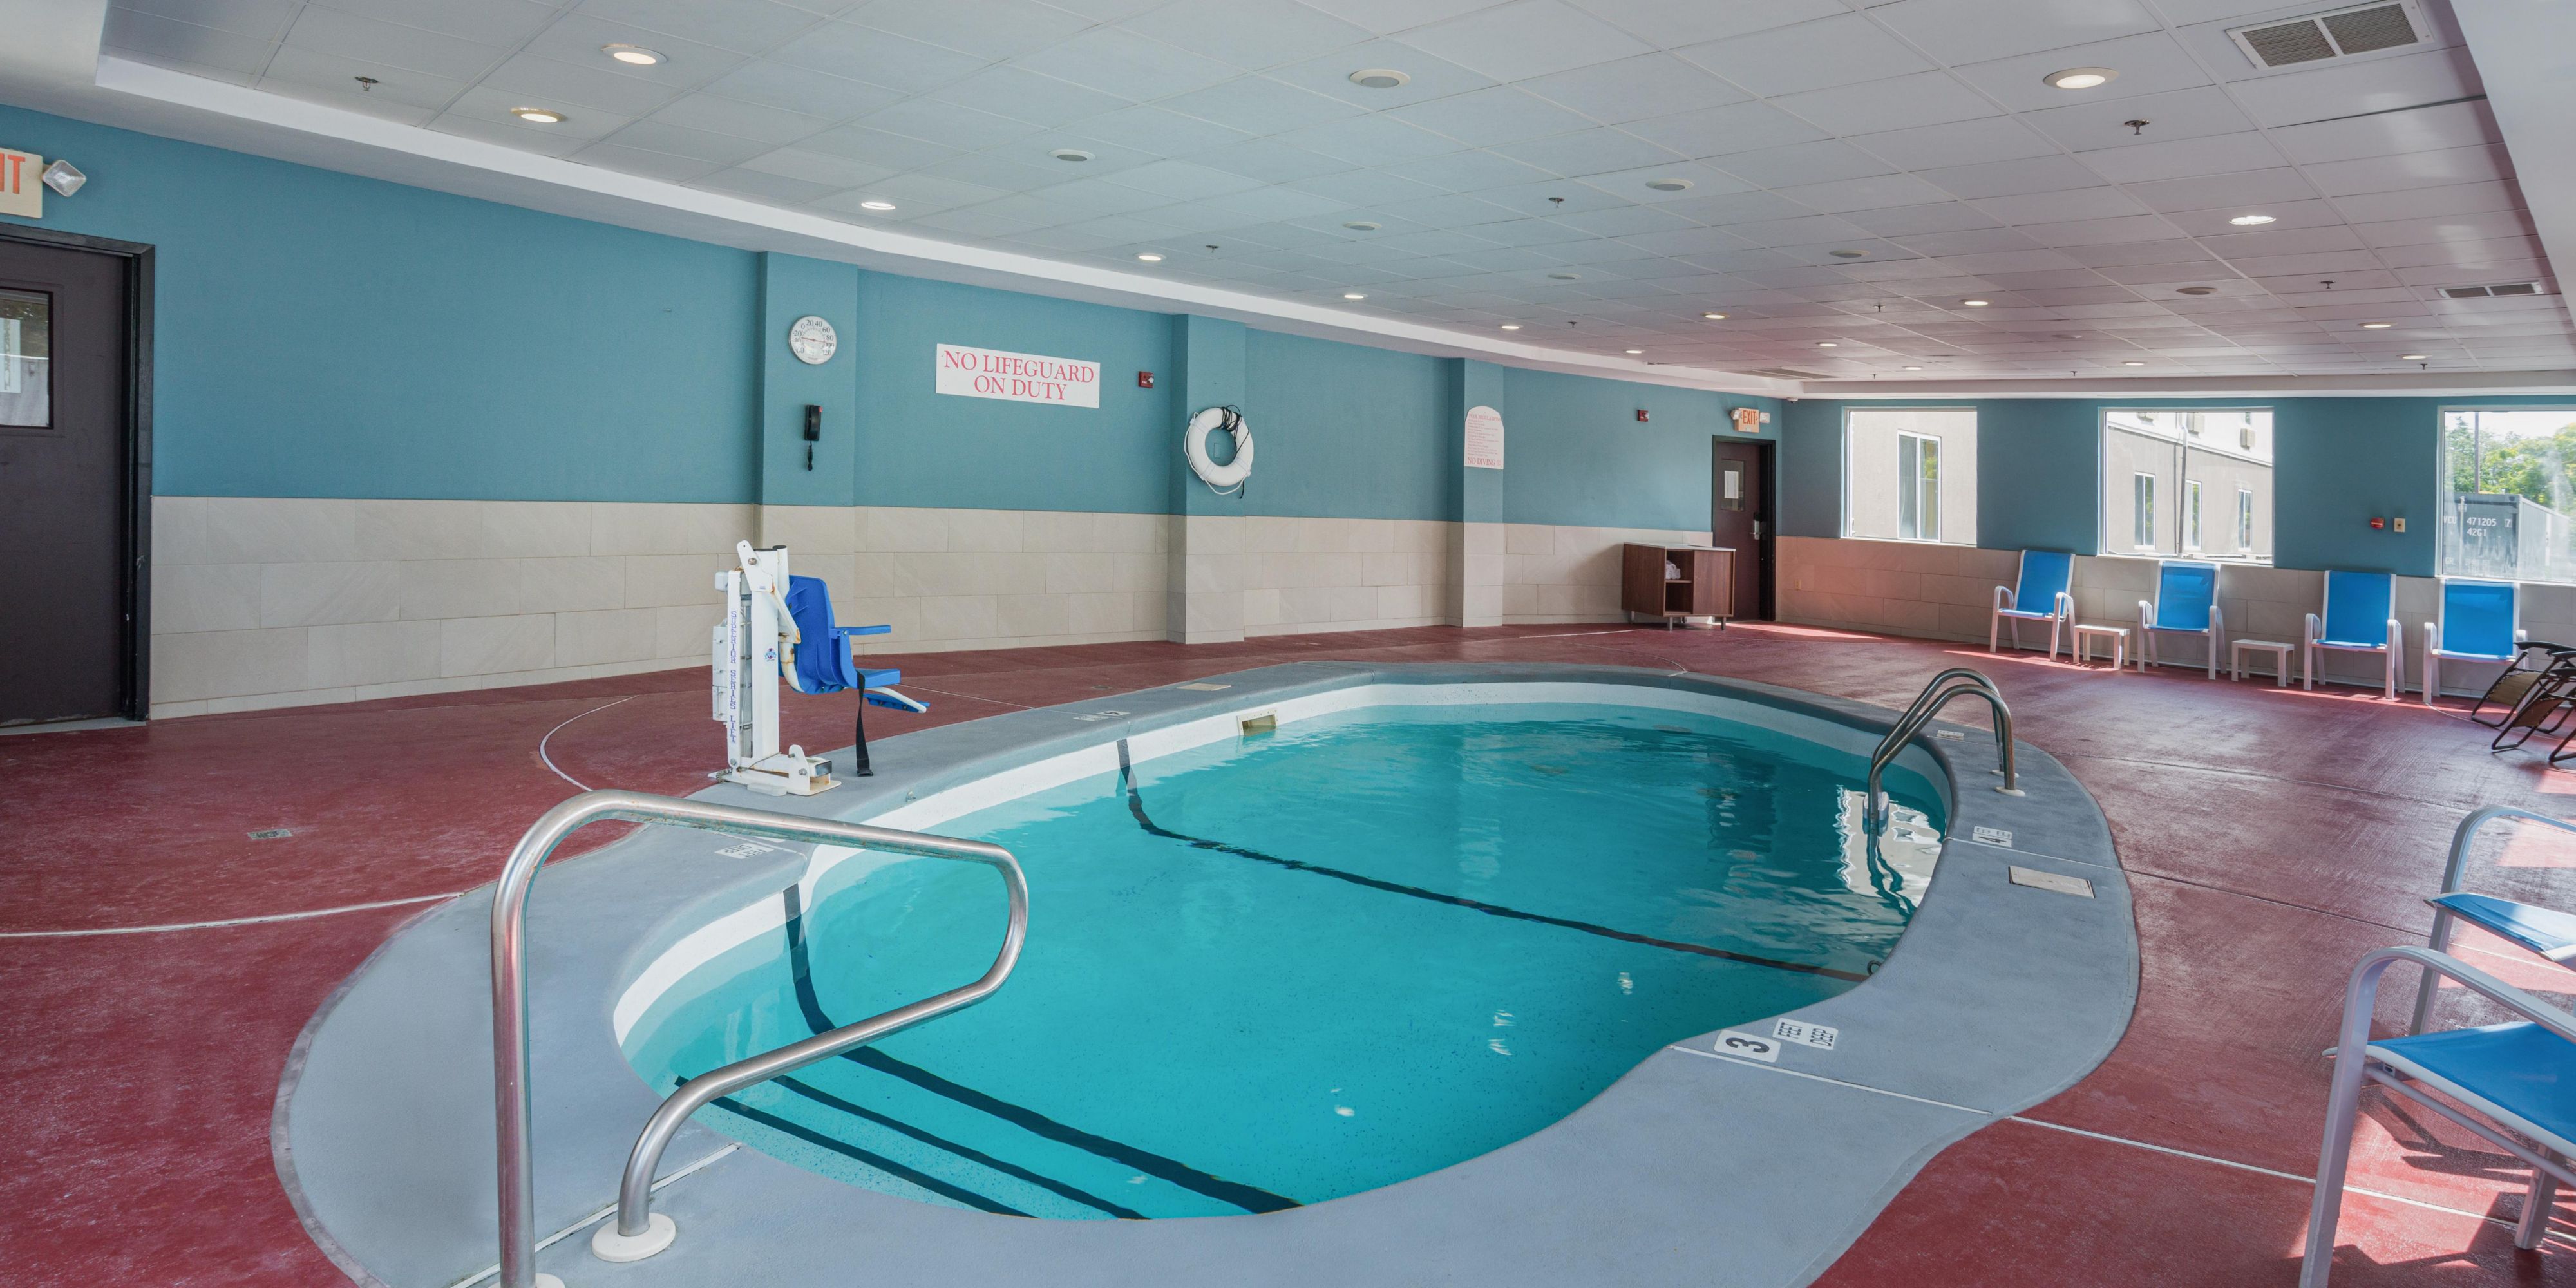 Take a family vacation and enjoy a dip in our indoor swimming pool during the cold winter in New England. On the road and need your workout, then give our fitness center a try so you stay in shape while away from home. 